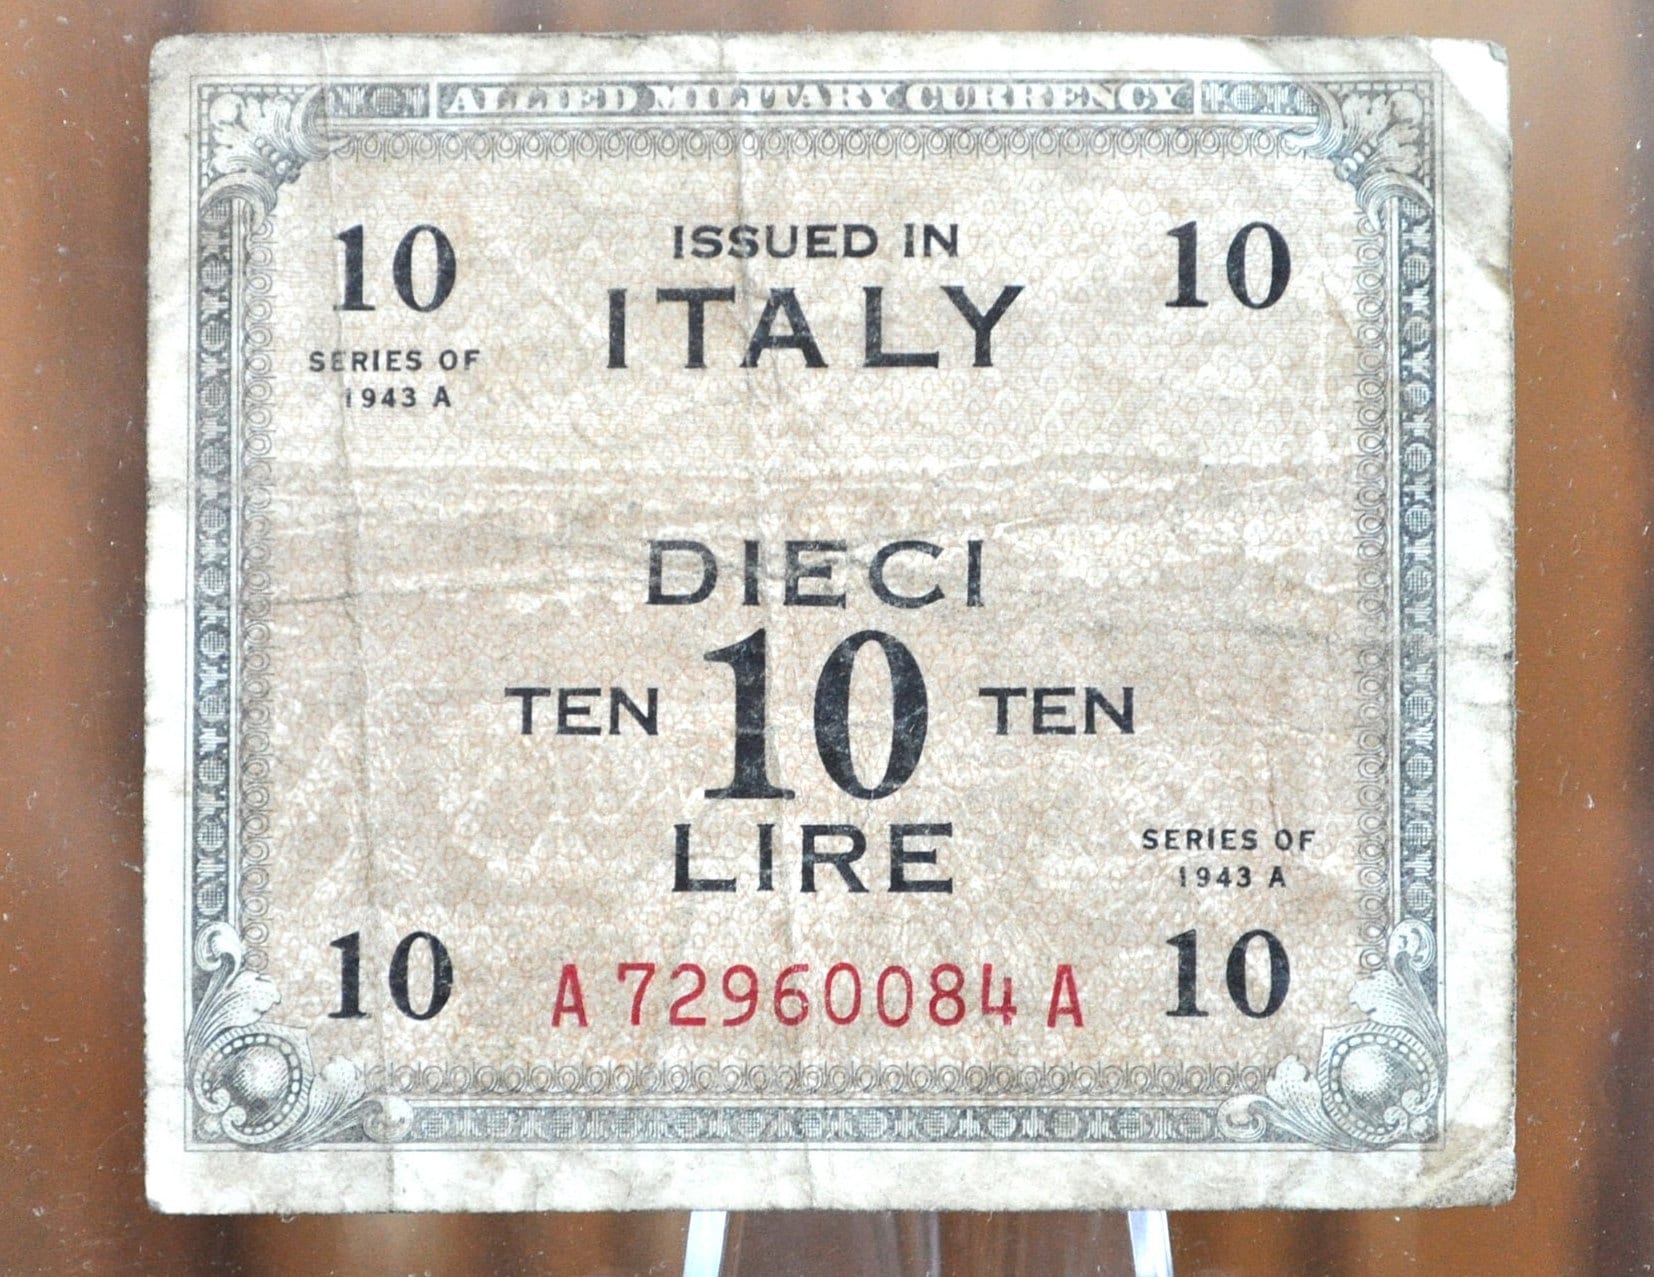 1943 10 Lire Italian Banknote - Cool Old Banknote from WWII - Italy Banknote Ten Lire Dieci Lire Banknote 1943 A Allied Military WWII Issue